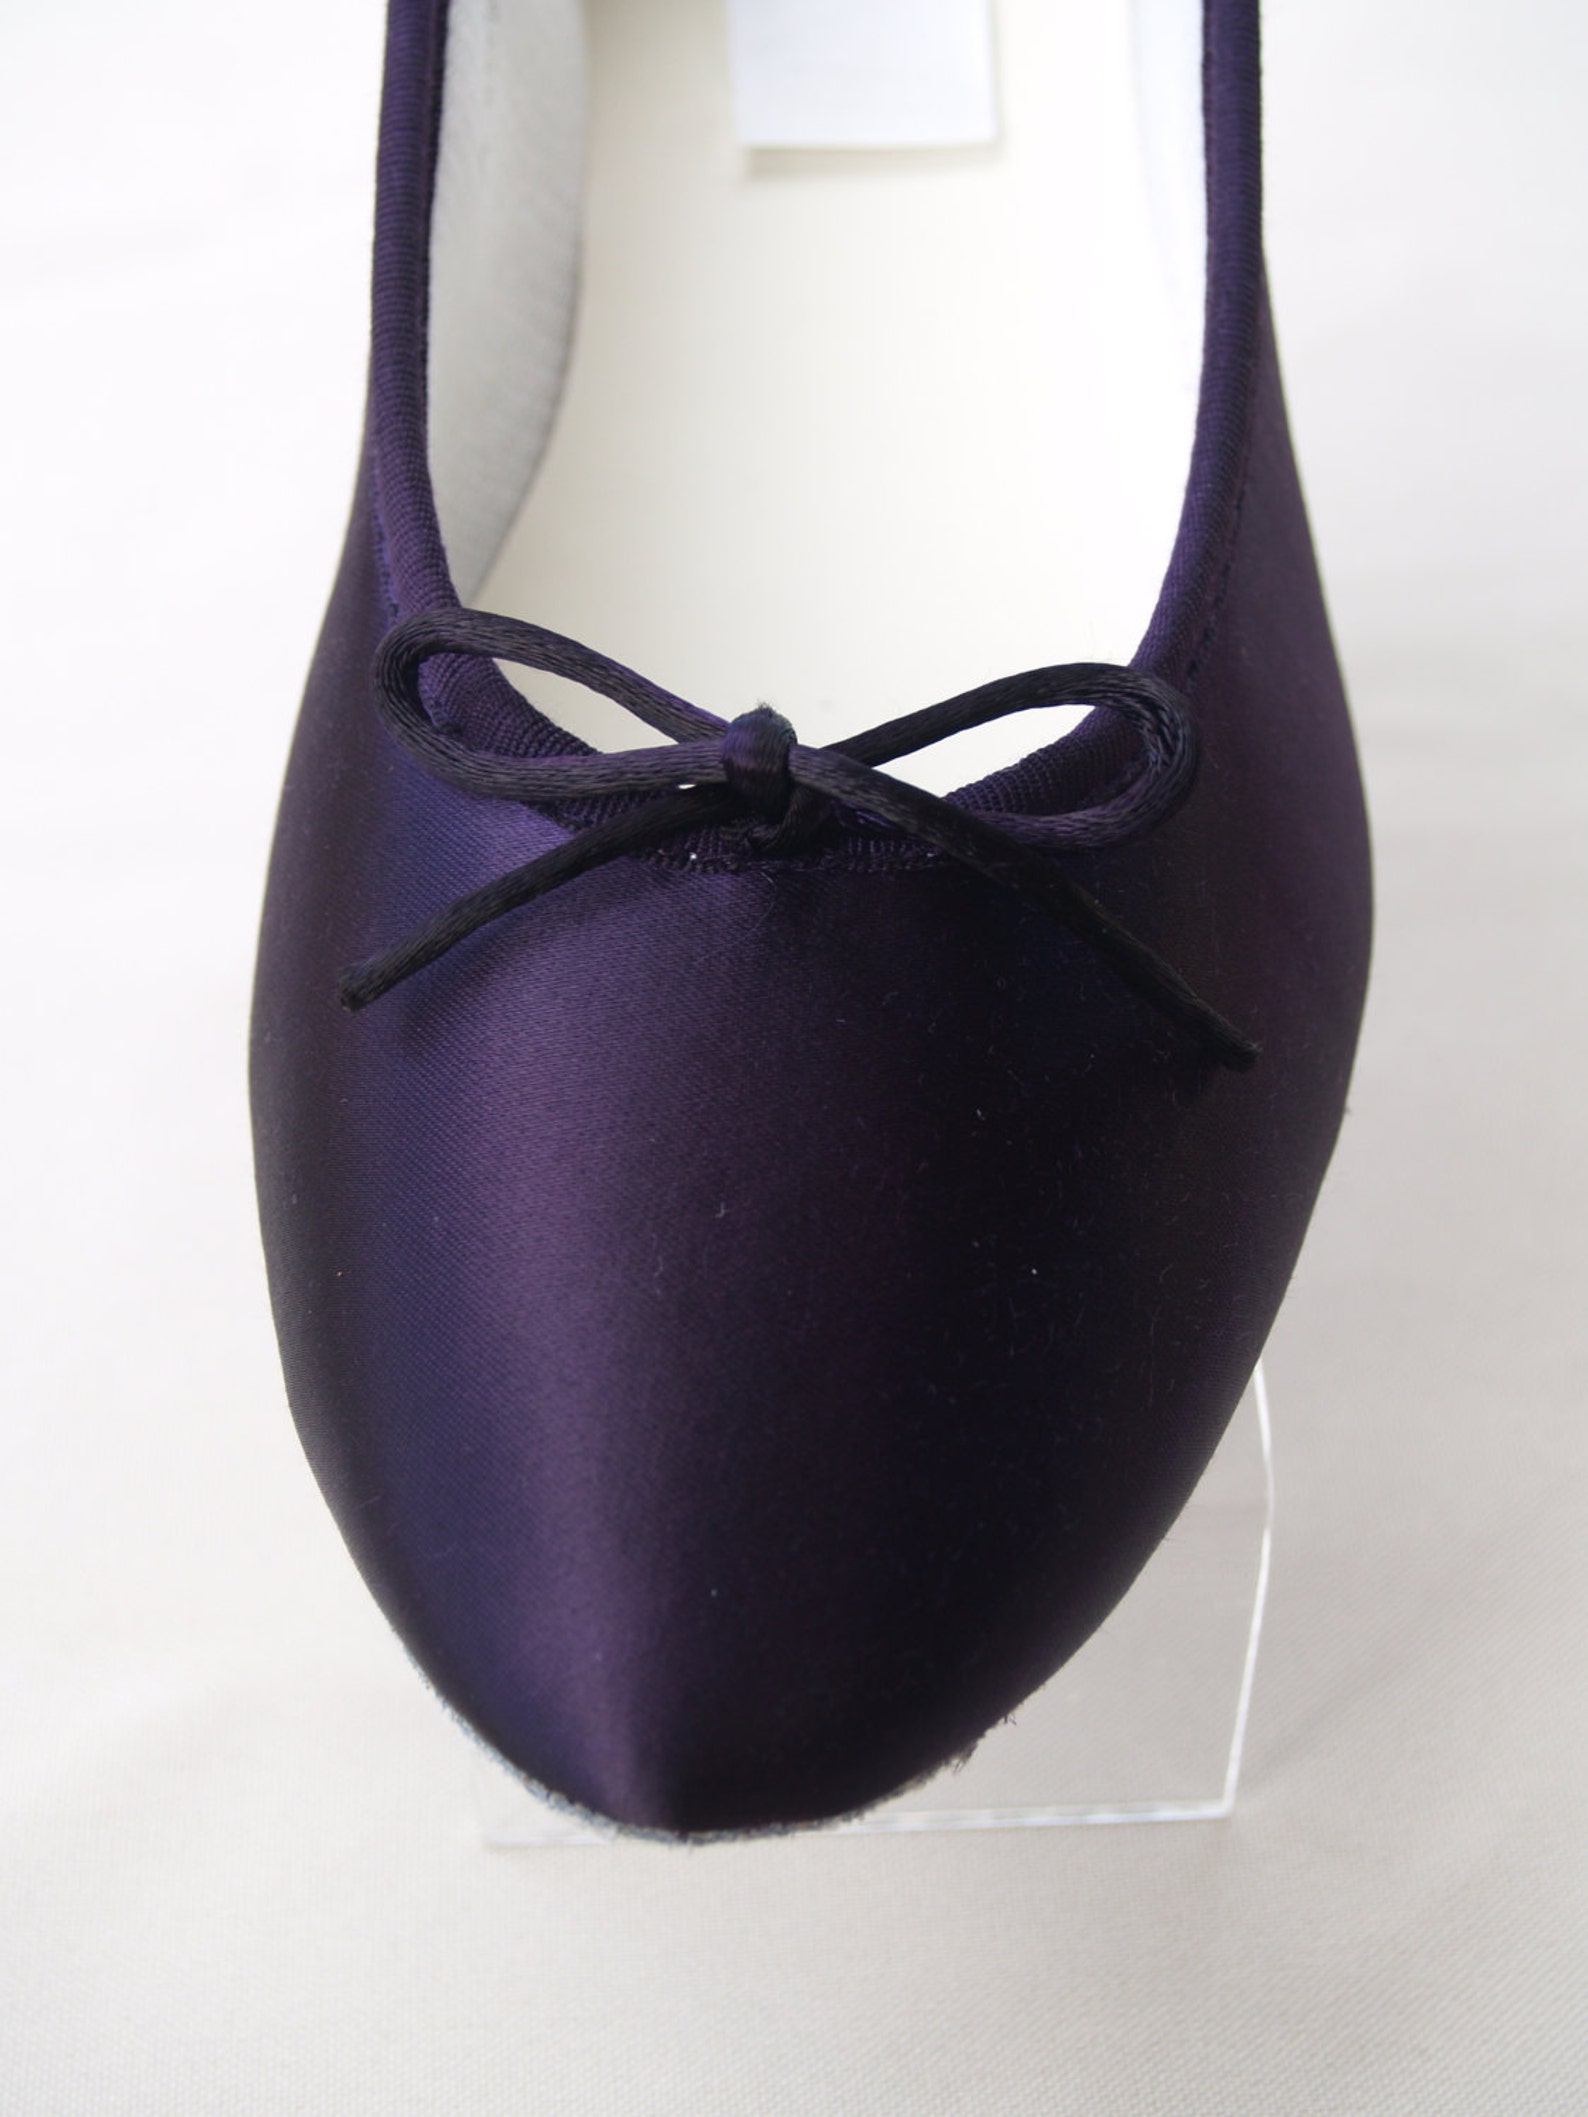 wedding dark eggplant shoes satin ballet style flat slipper, wedding shoes, bridesmaids, special occasion, comfort